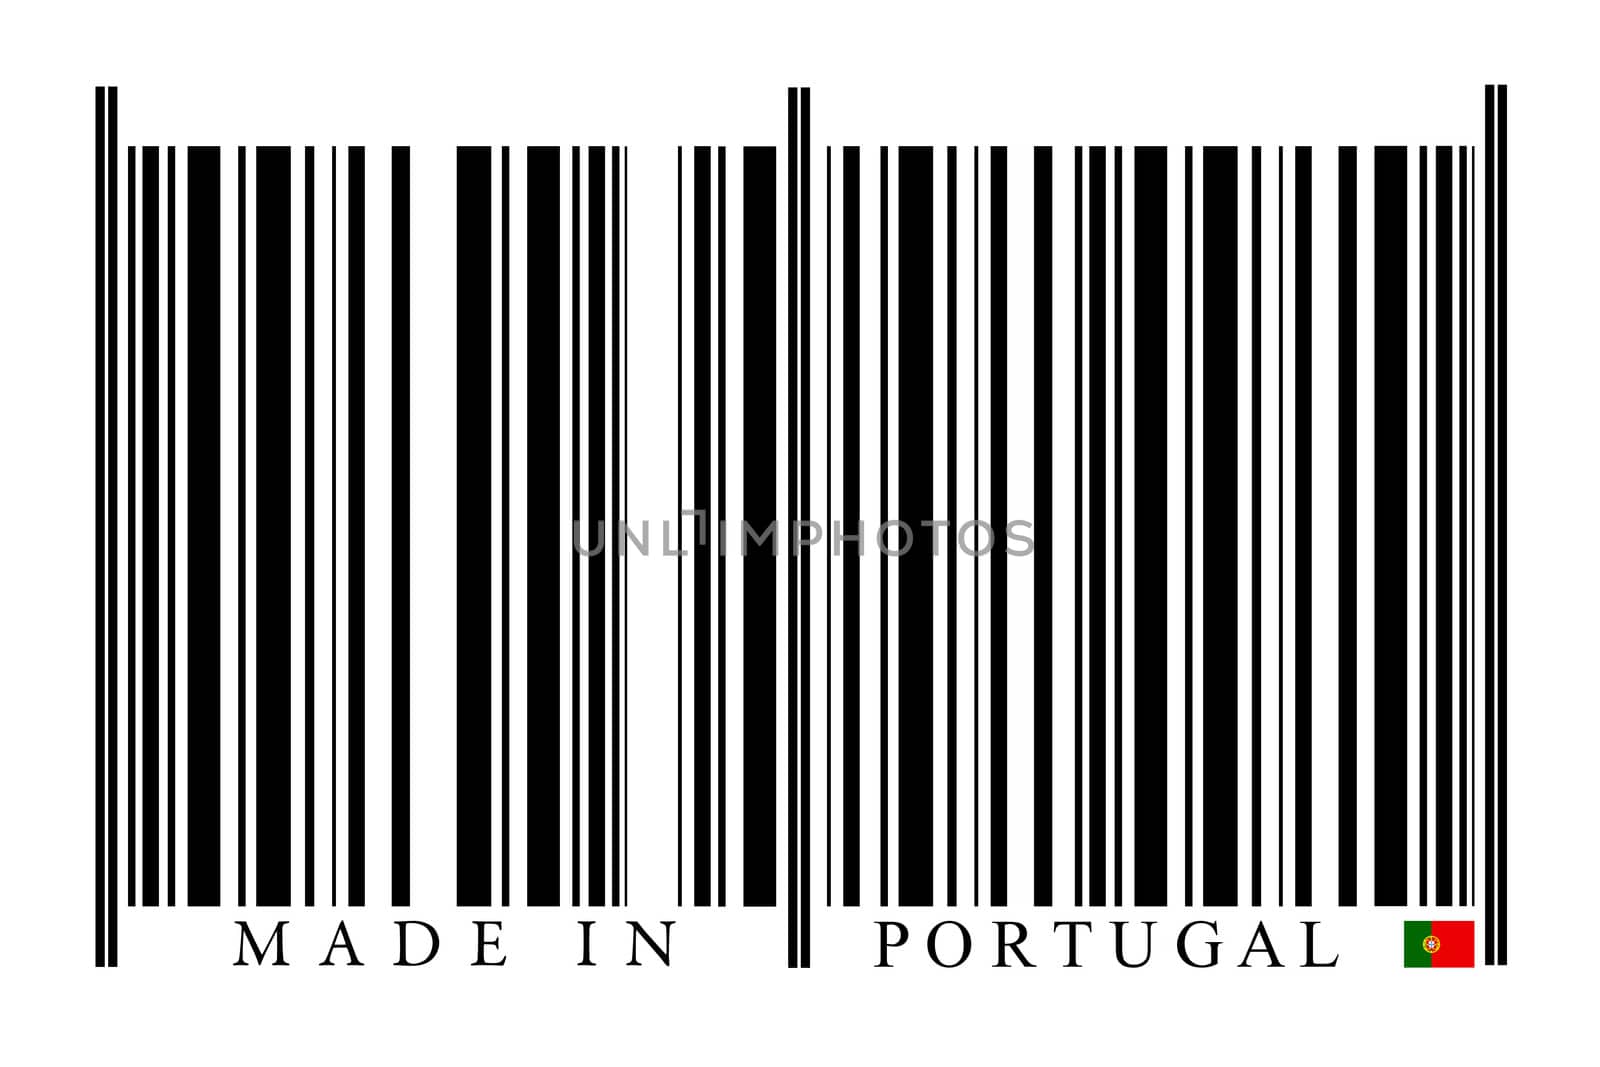 Portugal Barcode on white background